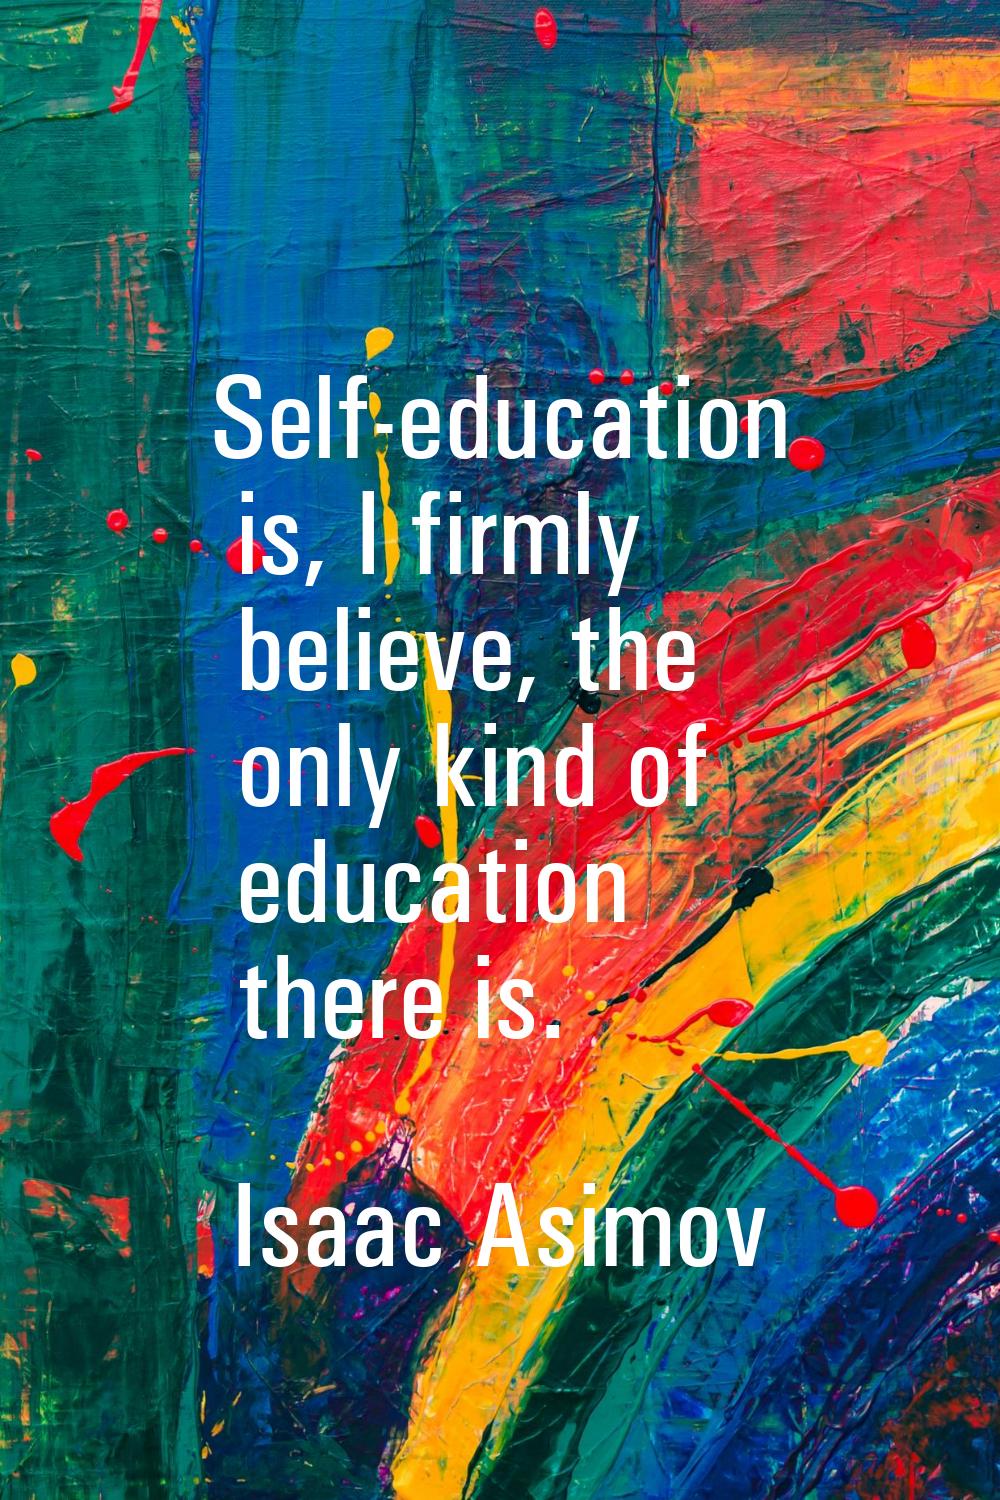 Self-education is, I firmly believe, the only kind of education there is.